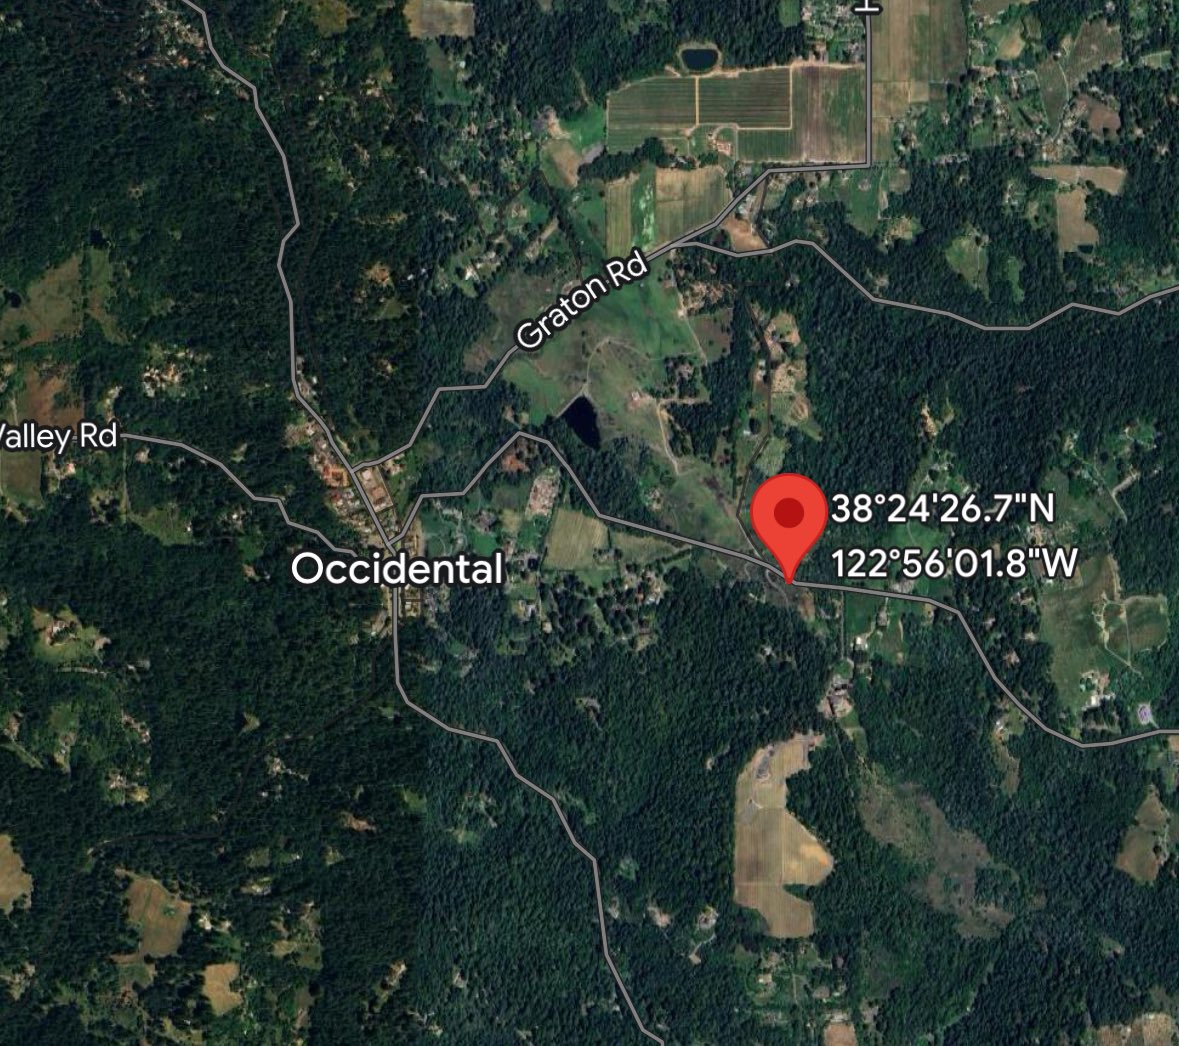 OccidentalFire: CAL FIRE and local agencies are responding to a vegetation fire near Occidental Rd and Facendini Ln, east of Occidental. The fire is approximately 1/2 acre burning in grass and timber at a slow rate of spread